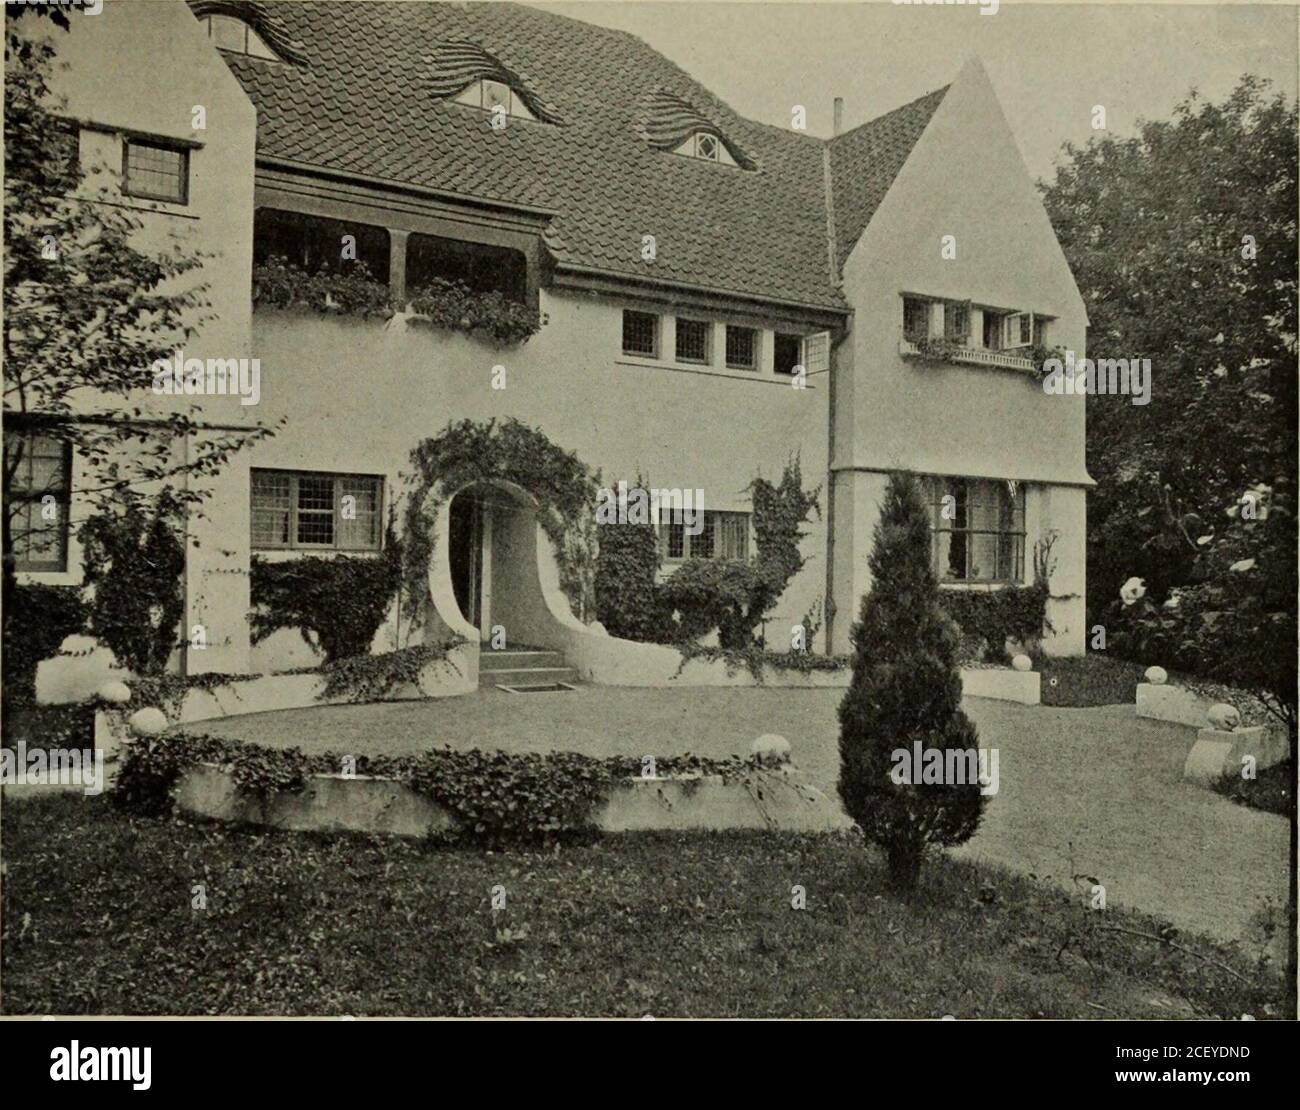 . International studio. DR. VASS.MER S COUNTRY HOUSE : GARDEN VIEW RUNGE & SCOTLAND, ARCHITECTS, BREMEN Recent Designs in Domestic Architecture. DR. VASSMER S COUNTRY HOUSE : MAIN ENTRANCE RUNGE & SCOTLAND, ARCHITECTS, BREMEN German Lloyd steamship Kronprinzessin Cecilie,which were illustrated in The Studio for December,1907 (pp. 238-240). Apropos of thework of these architects in relation todomestic architecture generally, andspecifically in regard to the designs nowillustrated, we quote the remarks of oneof our German correspondents. Two factors (he says) have played animportant part in the Stock Photo